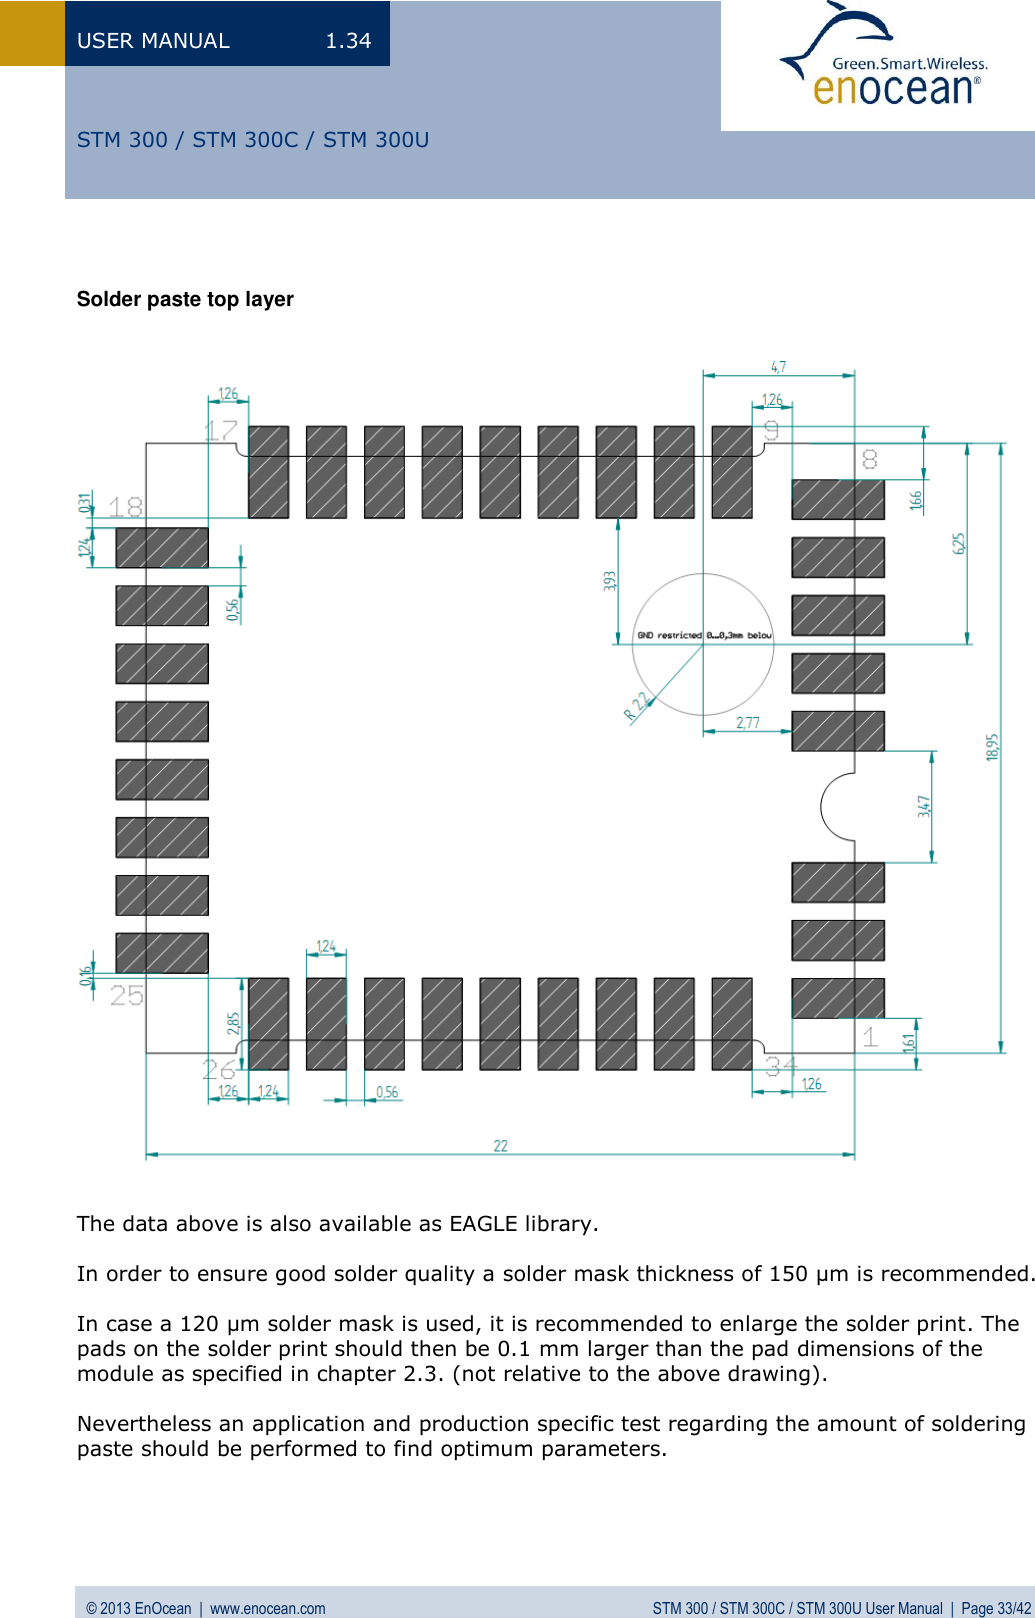 USER MANUAL  1.34 © 2013 EnOcean  |  www.enocean.com  STM 300 / STM 300C / STM 300U User Manual  |  Page 33/42   STM 300 / STM 300C / STM 300U   Solder paste top layer                                     The data above is also available as EAGLE library.  In order to ensure good solder quality a solder mask thickness of 150 µm is recommended.  In case a 120 µm solder mask is used, it is recommended to enlarge the solder print. The pads on the solder print should then be 0.1 mm larger than the pad dimensions of the module as specified in chapter 2.3. (not relative to the above drawing).   Nevertheless an application and production specific test regarding the amount of soldering paste should be performed to find optimum parameters.     